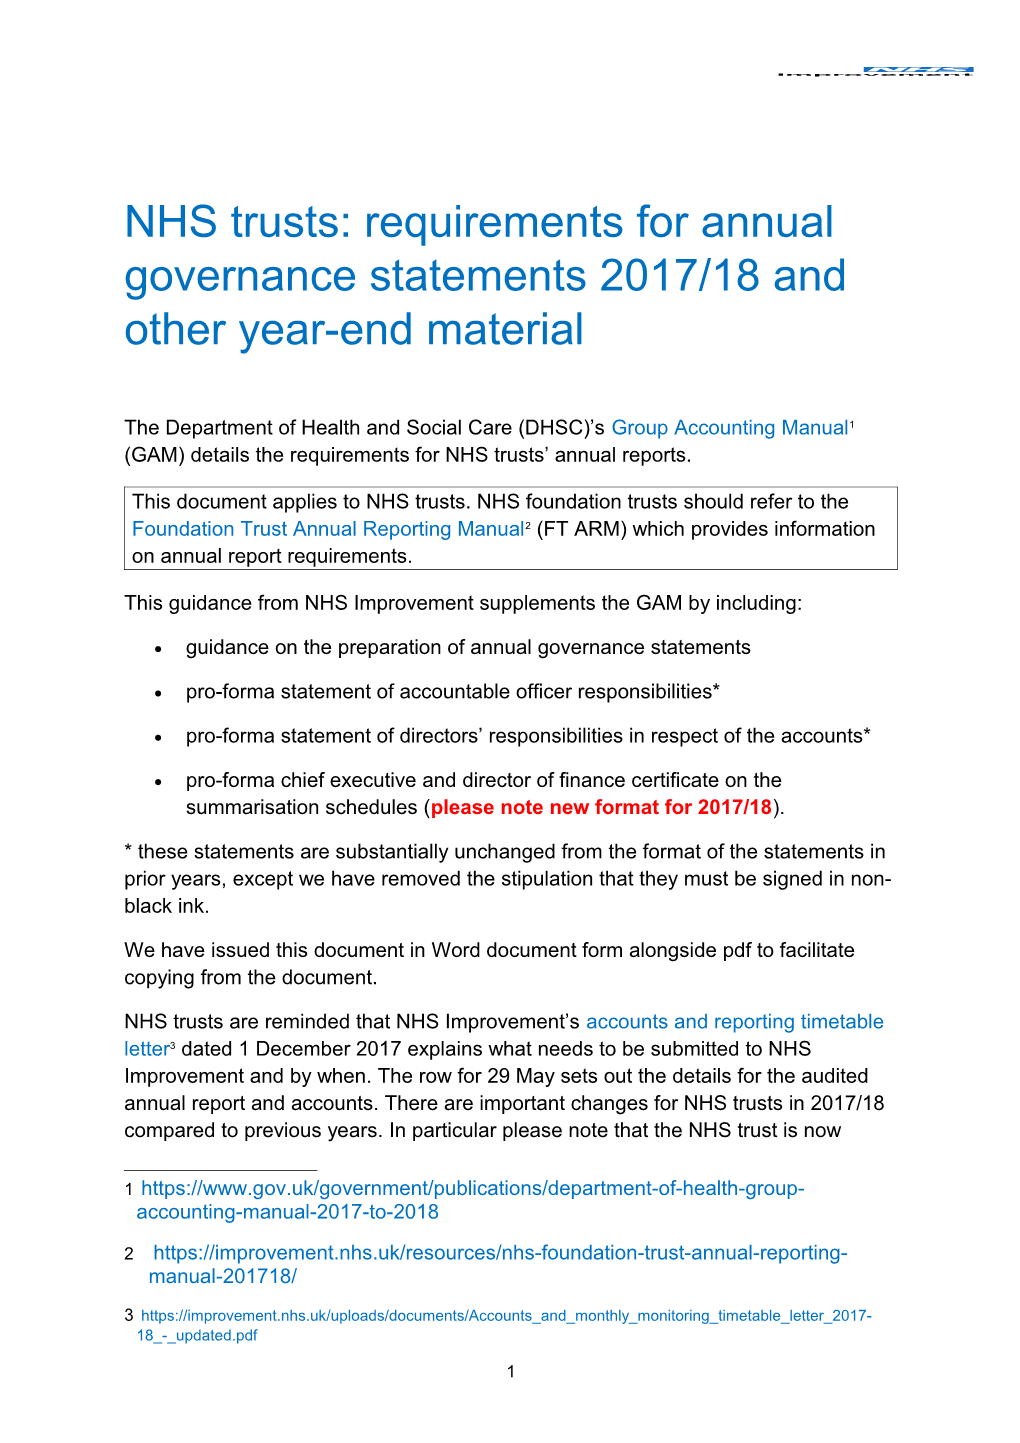 NHS Trusts: Requirements for Annual Governance Statements 2017/18 and Other Year-End Material